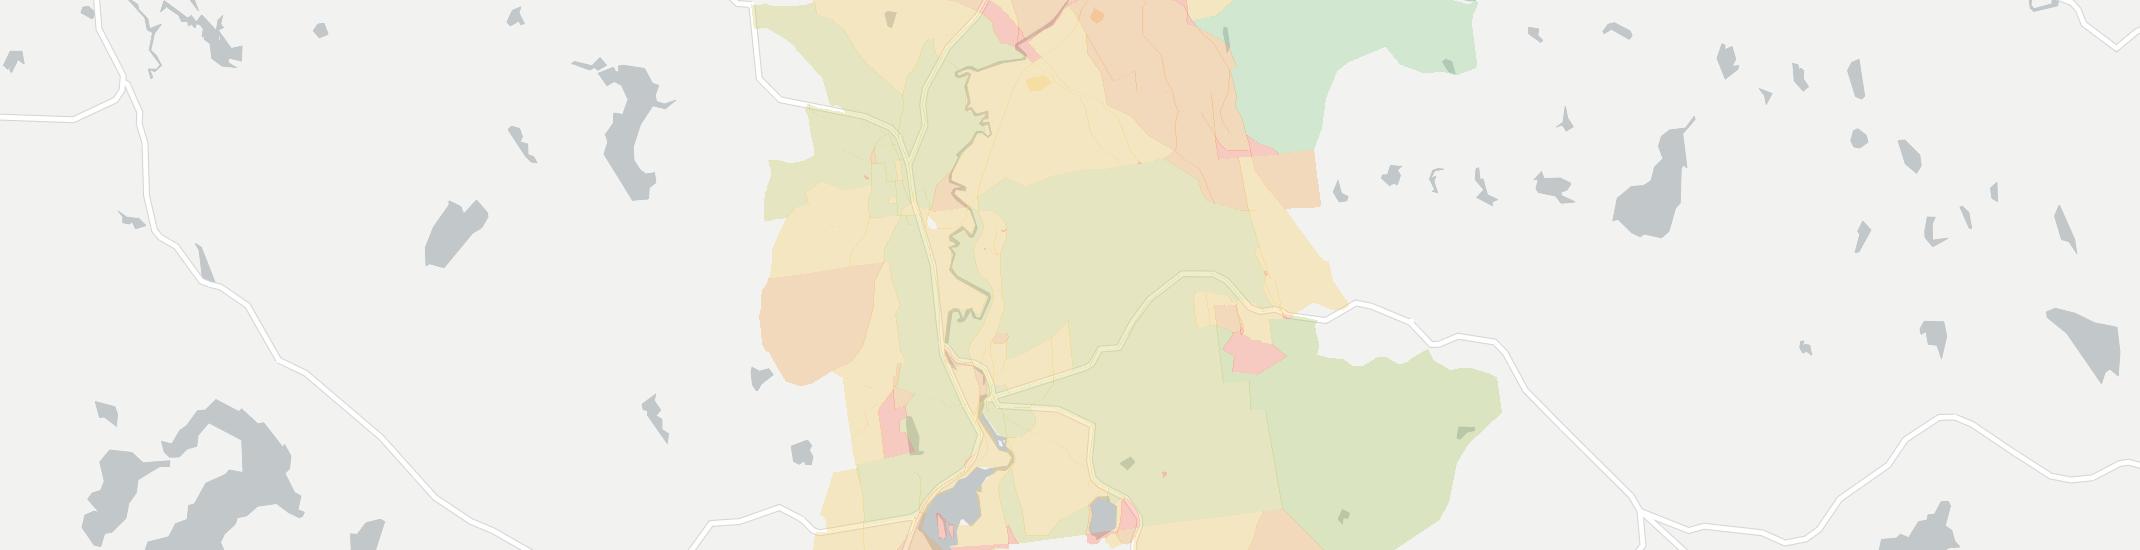 Bennington Internet Competition Map. Click for interactive map.